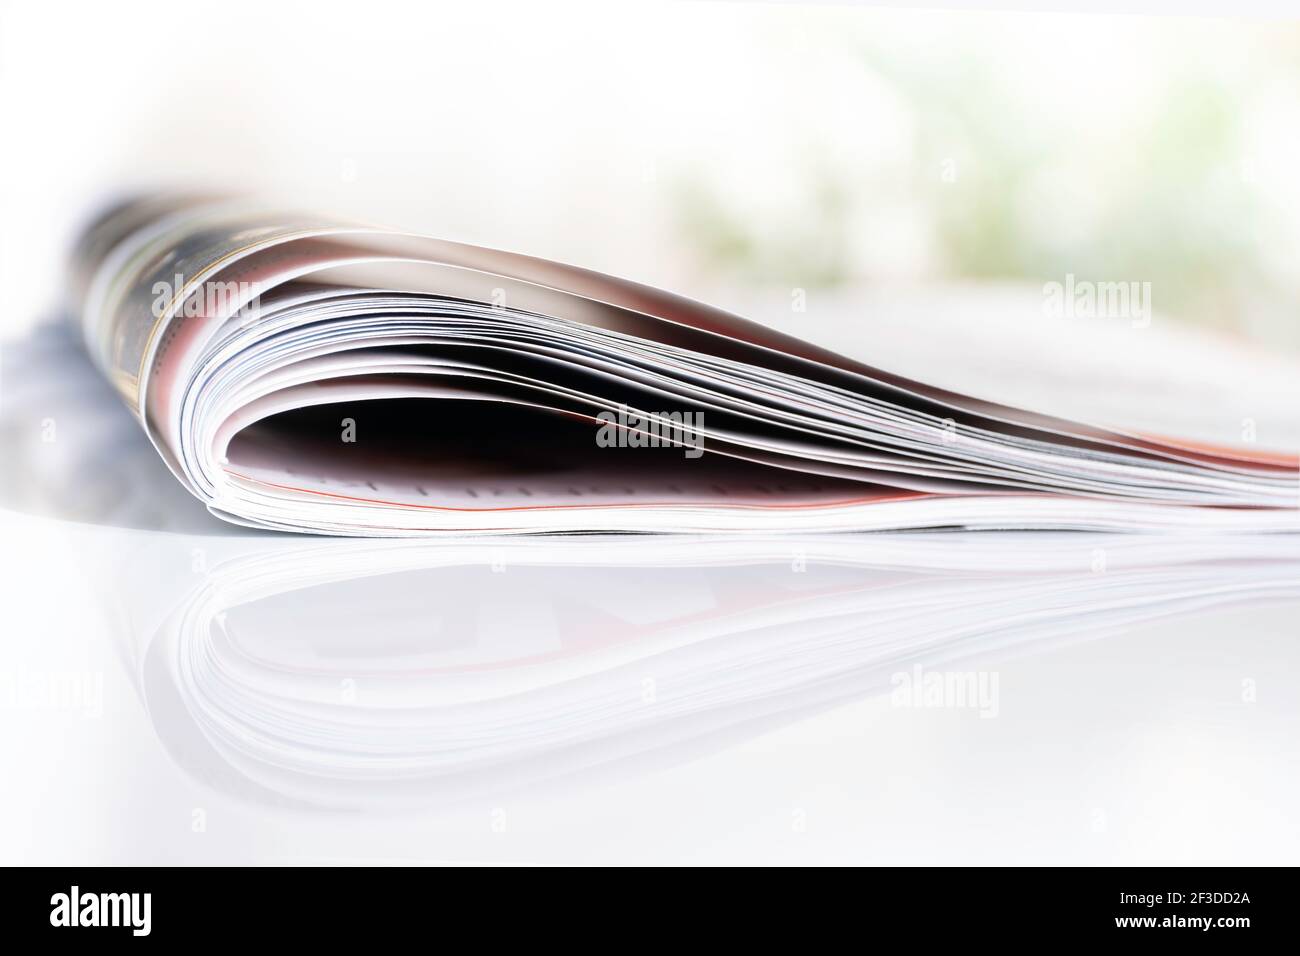 Folded magazine reflected on a white surface with shallow depth of field. Blurred background of green bushes Stock Photo